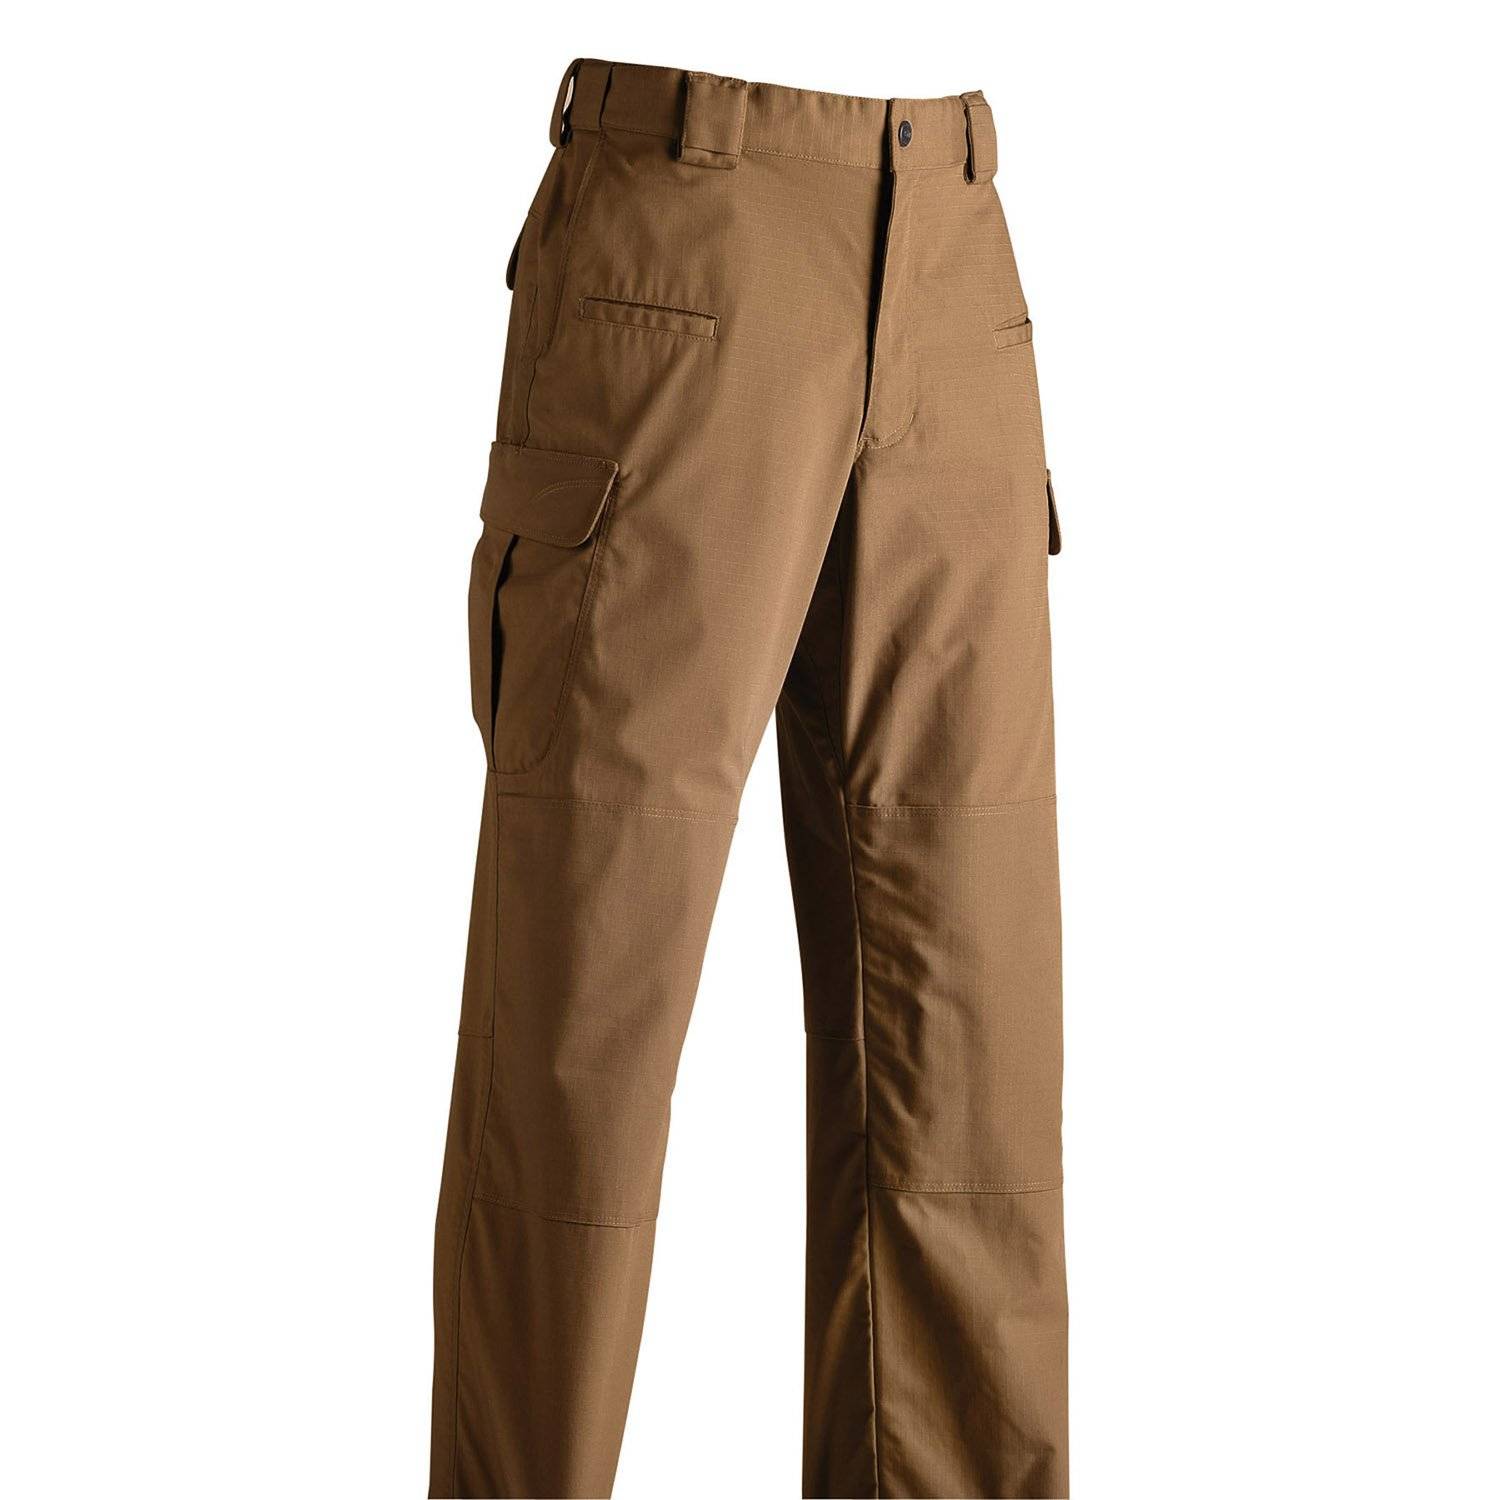 5.11 TACTICAL STRYKE PANTS WITH FLEXTAC